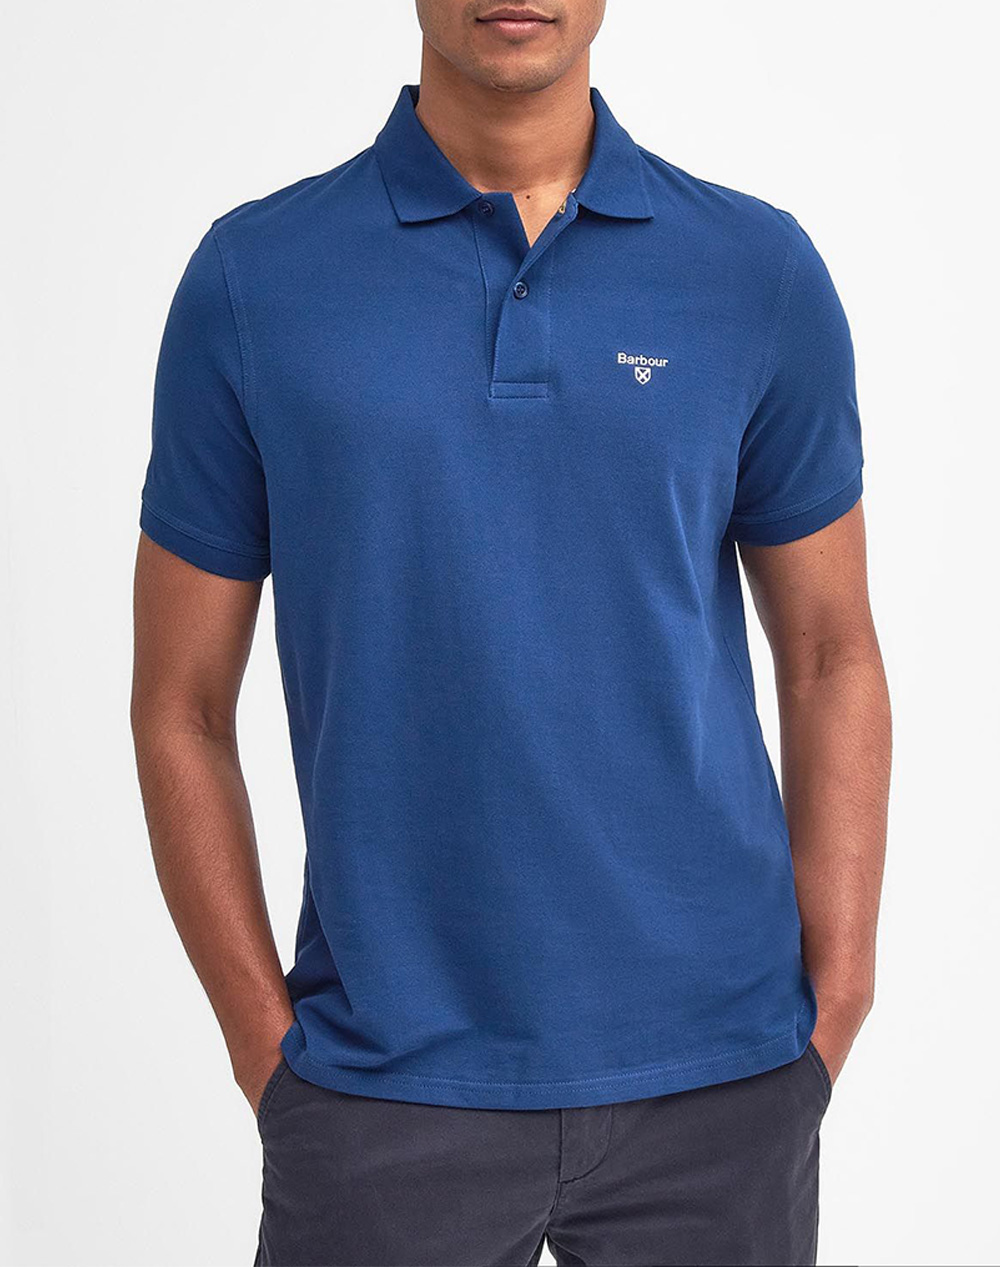 BARBOUR BARBOUR LIGHTWEIGHT SPORTS POLO ΜΠΛΟΥΖΑ POLO MML1367-BRBL91 Blue